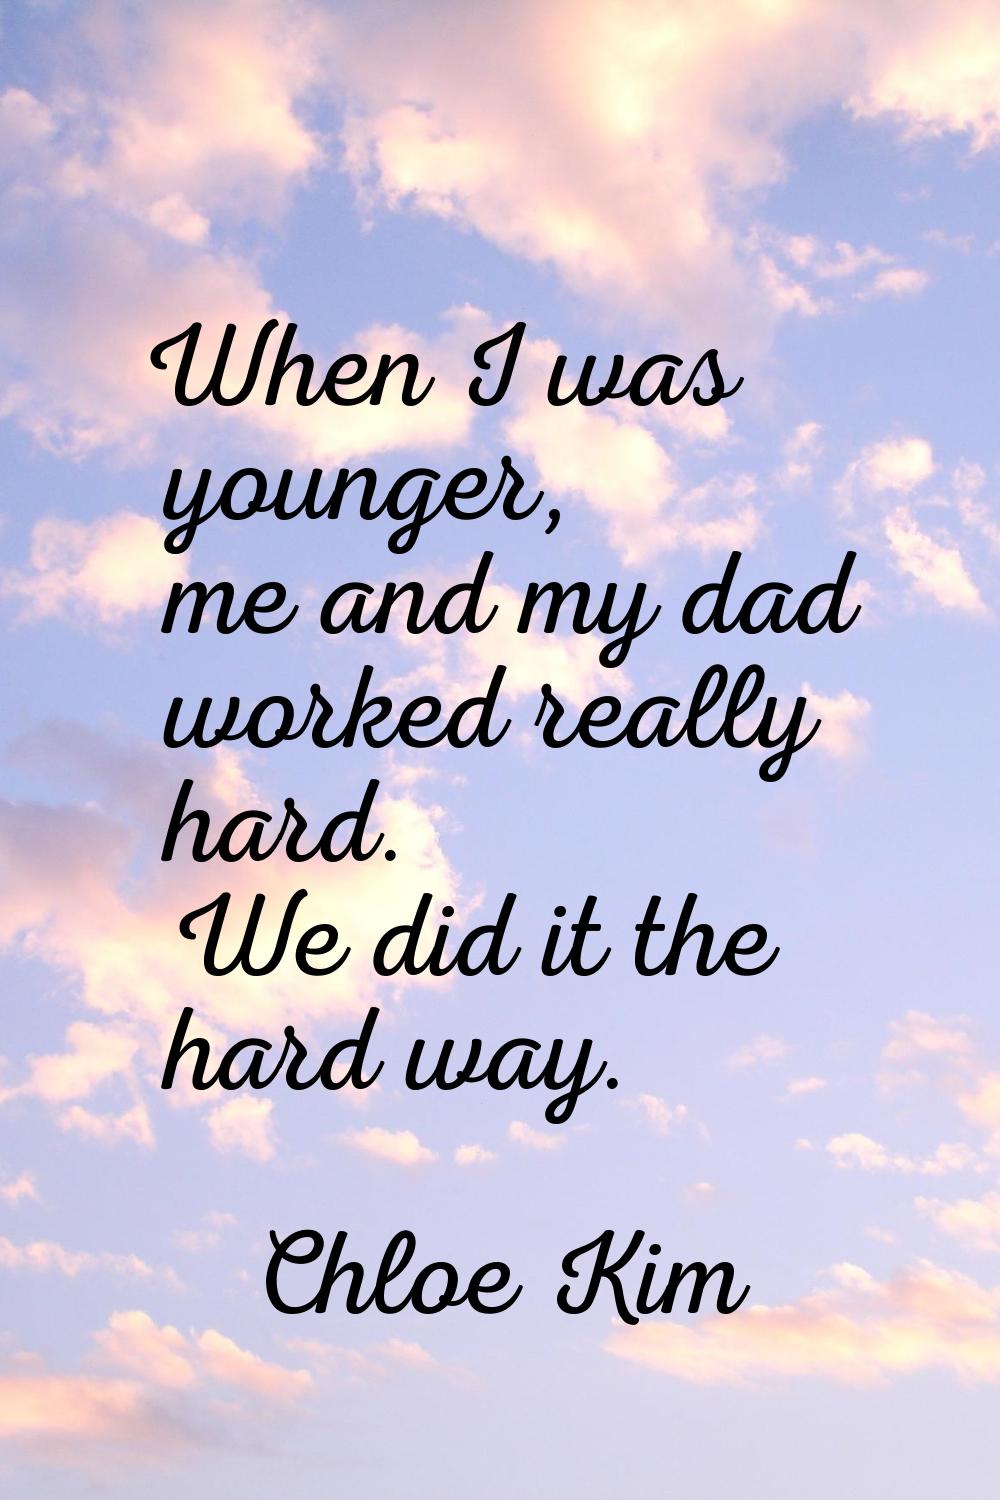 When I was younger, me and my dad worked really hard. We did it the hard way.